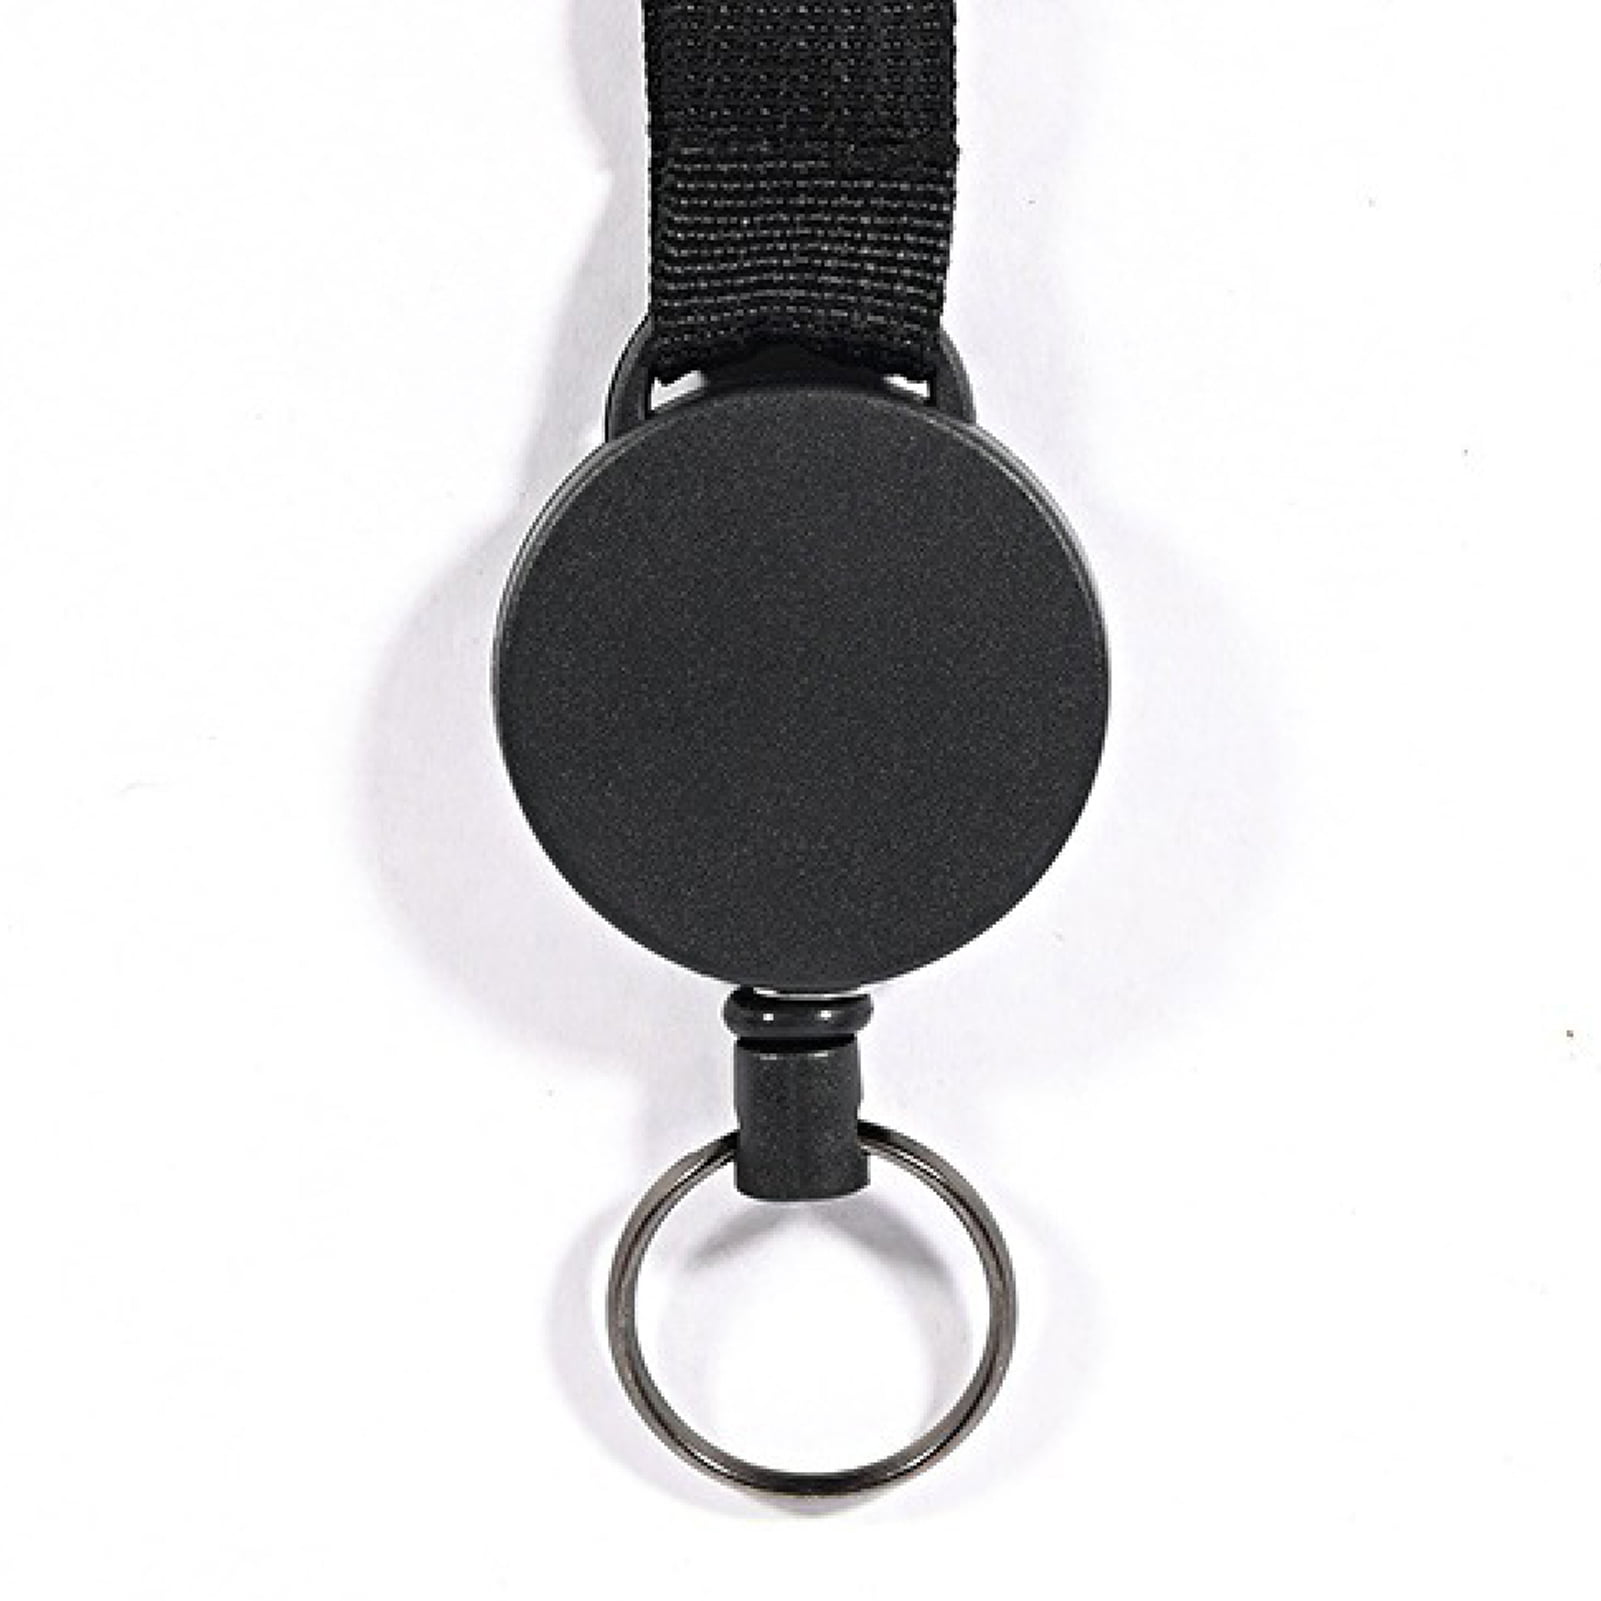 Details about   Outdoor Retractable Keychain Creative Carabiner Black Anti-Lost Key Rings Hot 